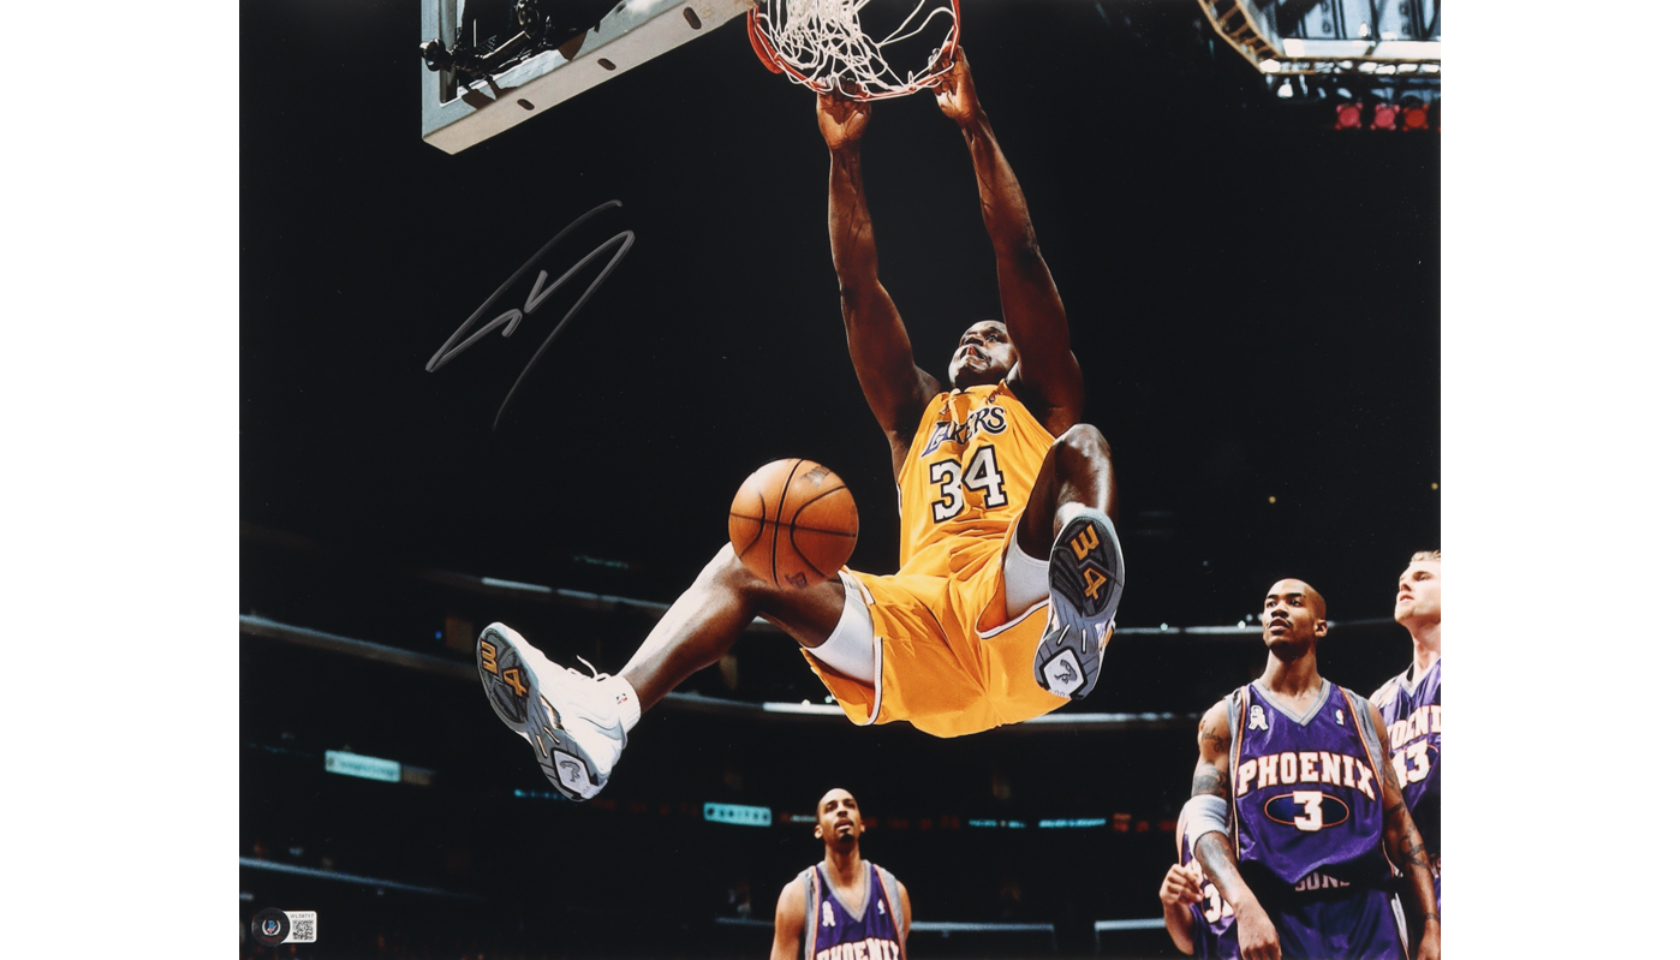 Shaquille O'Neal Signed Framed Jersey - CharityStars